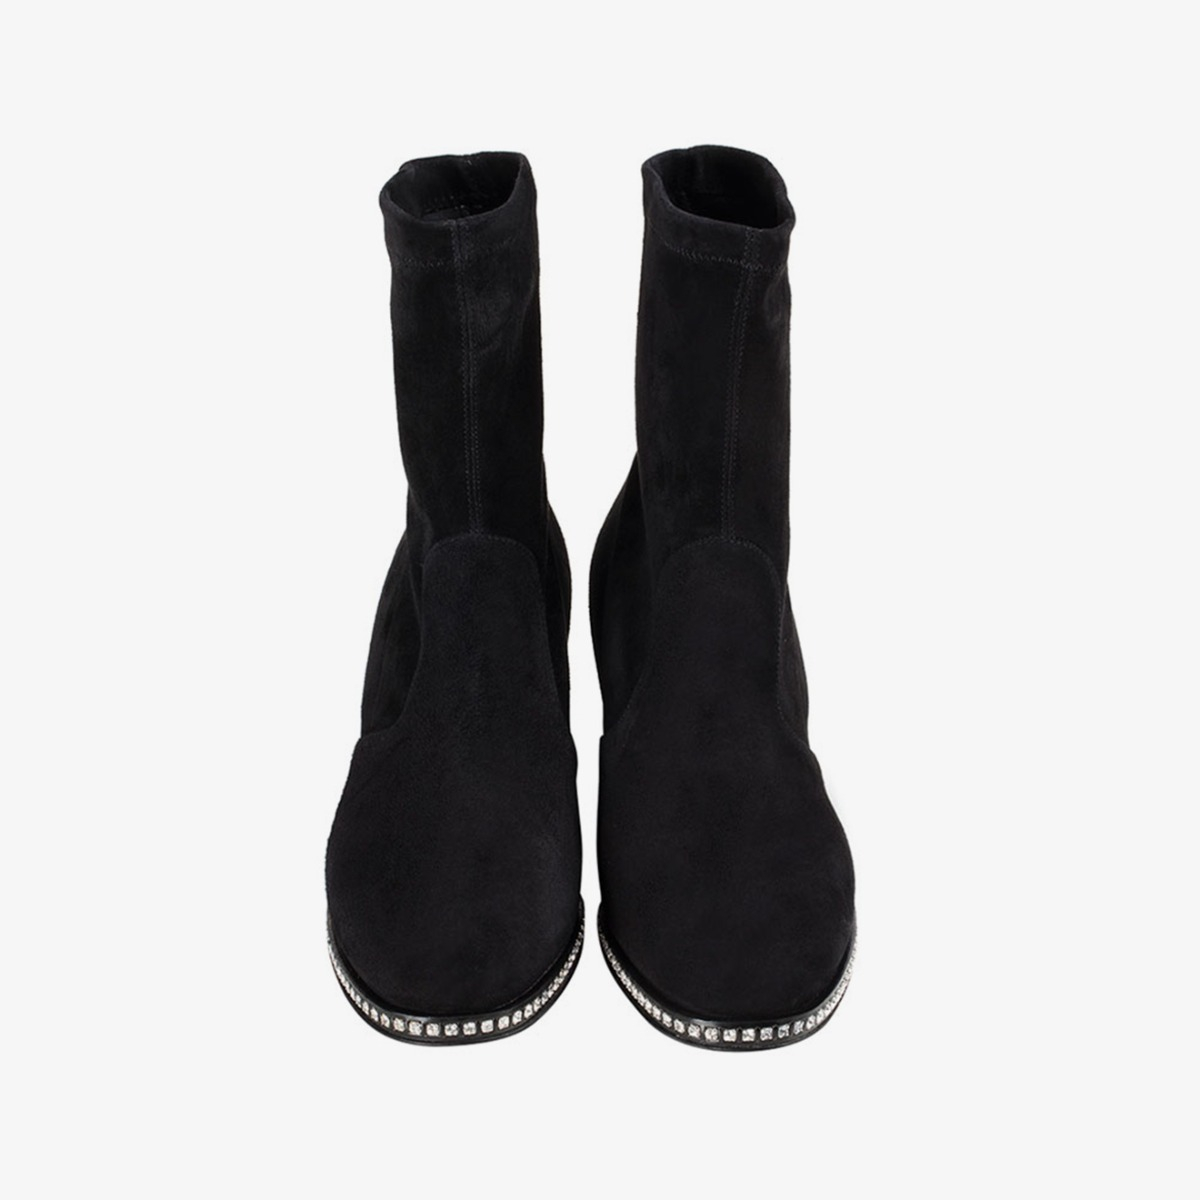 GINETTE ANKLE BOOT 60 mm - Le Silla official outlet